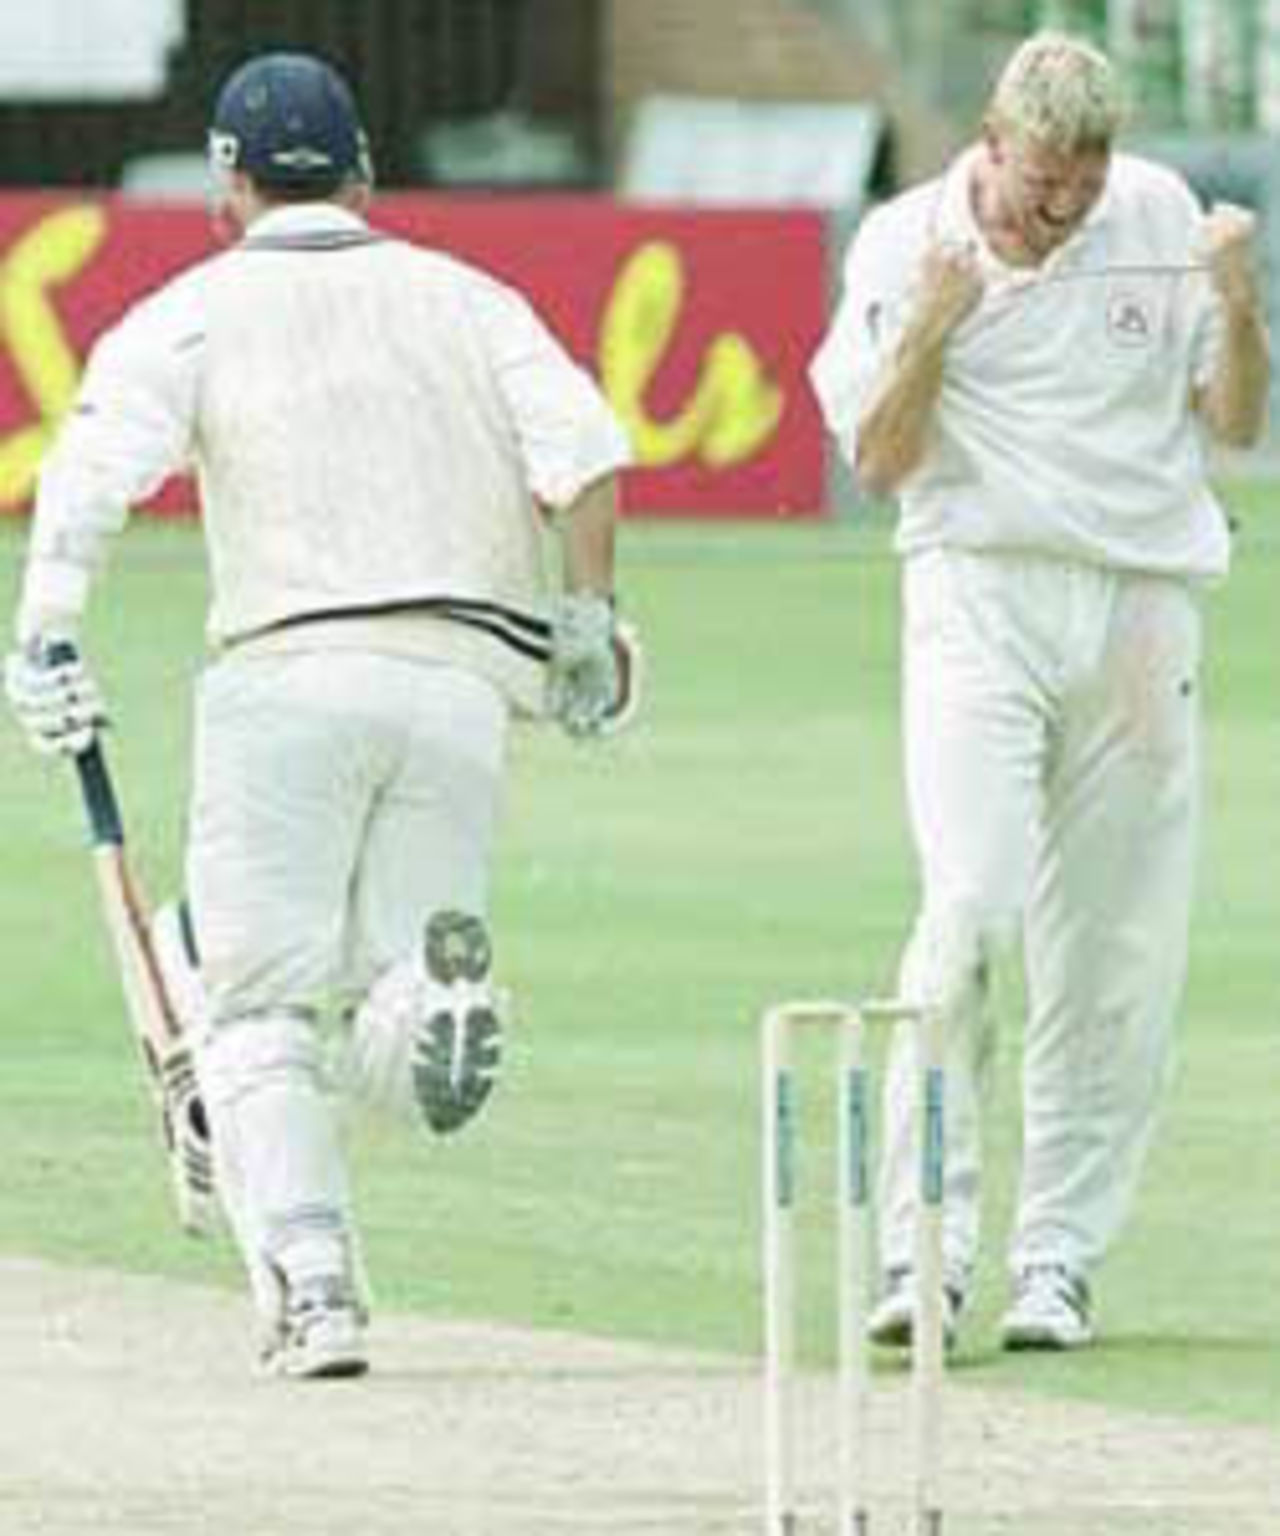 Peter Martin celebrates trapping McCague LBW, PPP healthcare County Championship Division One, 2000, Lancashire v Kent, Old Trafford, Manchester, 17-20 August 2000(Day 2).